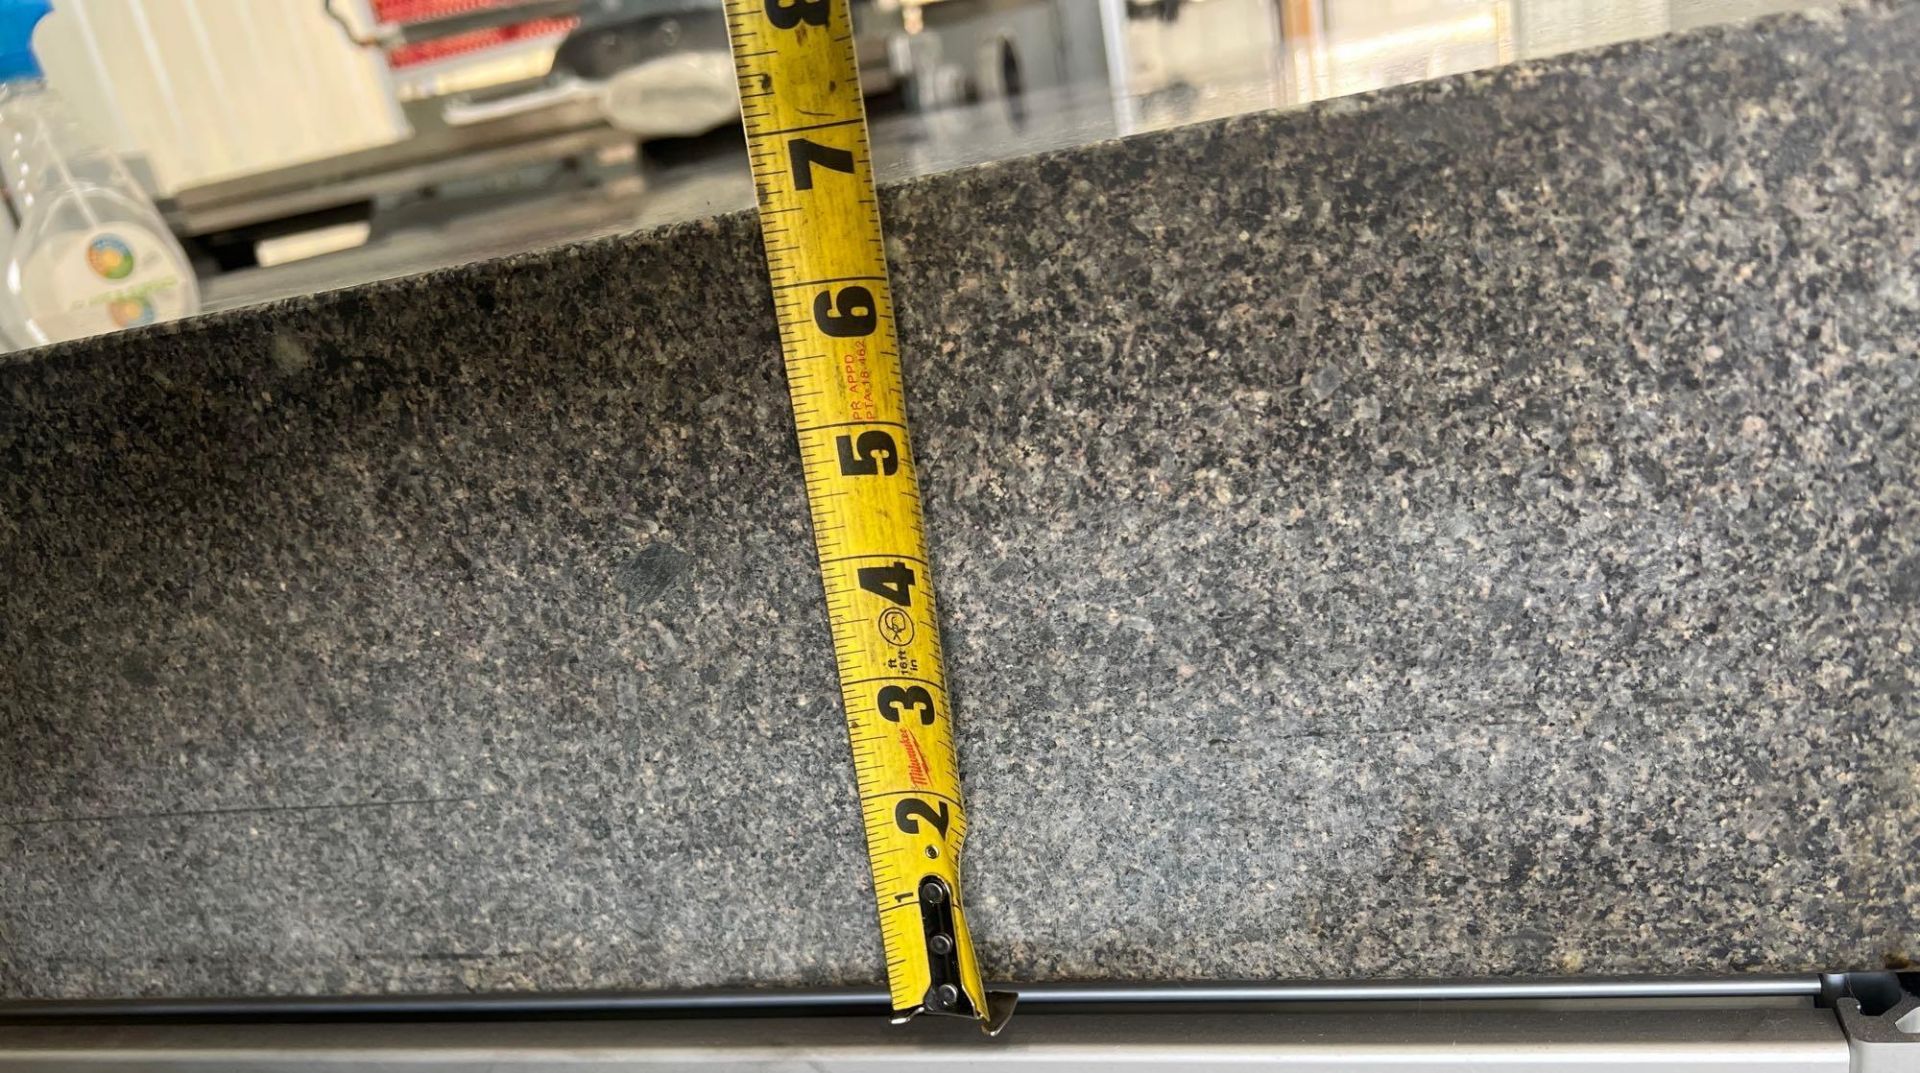 36"x24"x6" Granite Inspection Plate w/Stand - Image 7 of 8